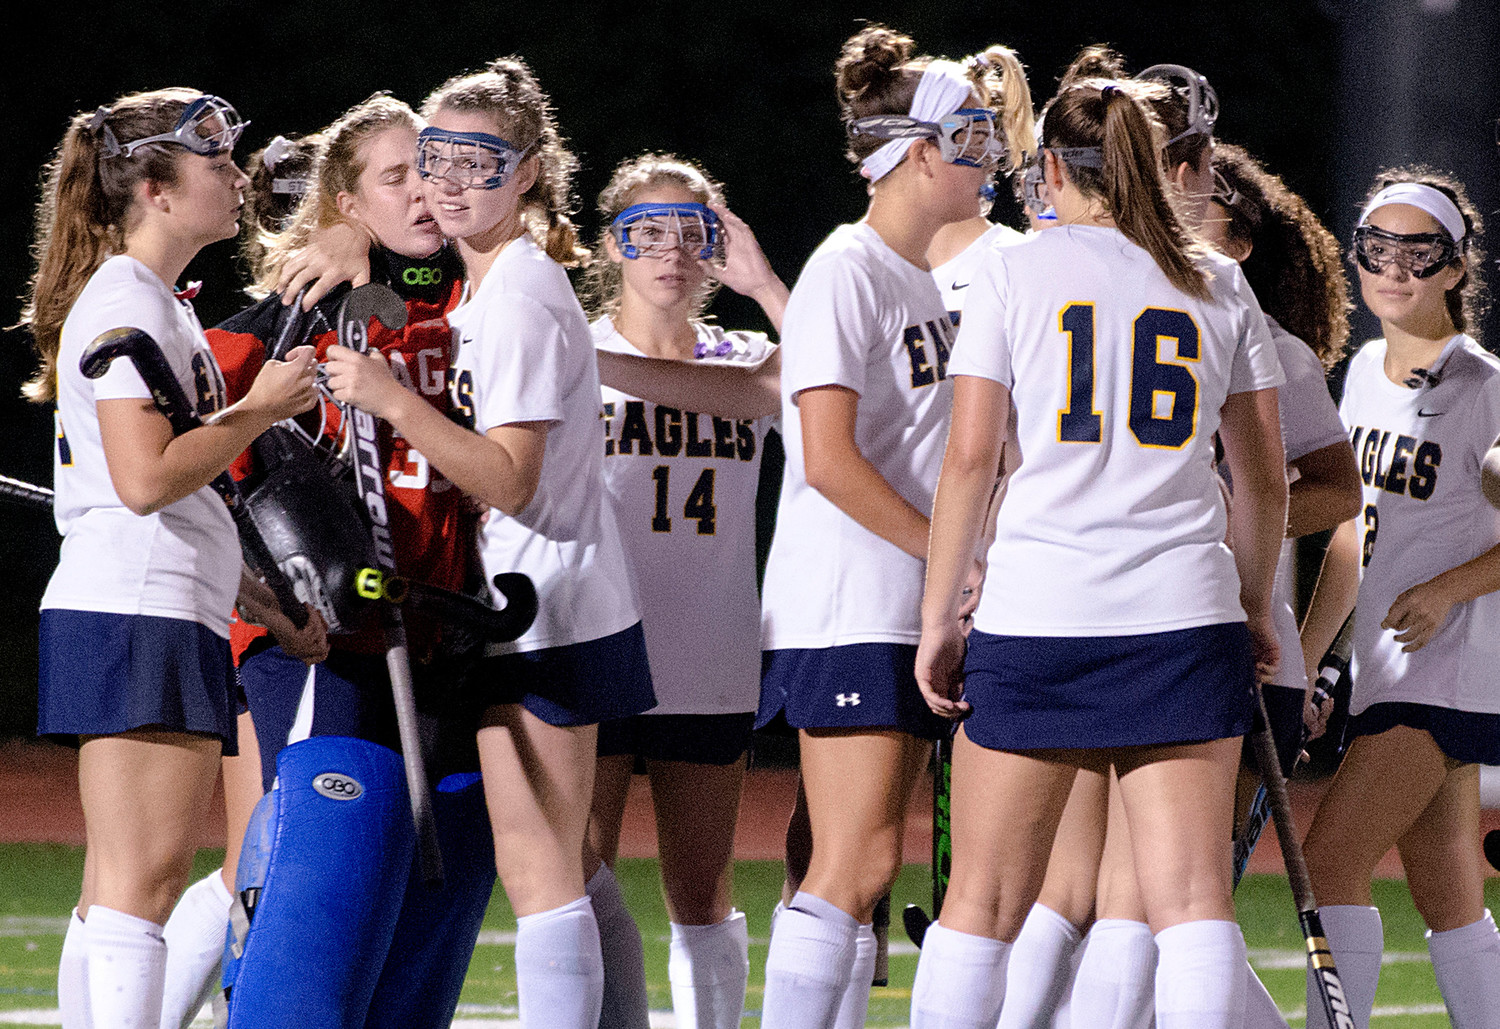 The Lady Eagles console goalkeeper Caileigh Durkin after the loss to North Kingstown in the Division I semifinals.